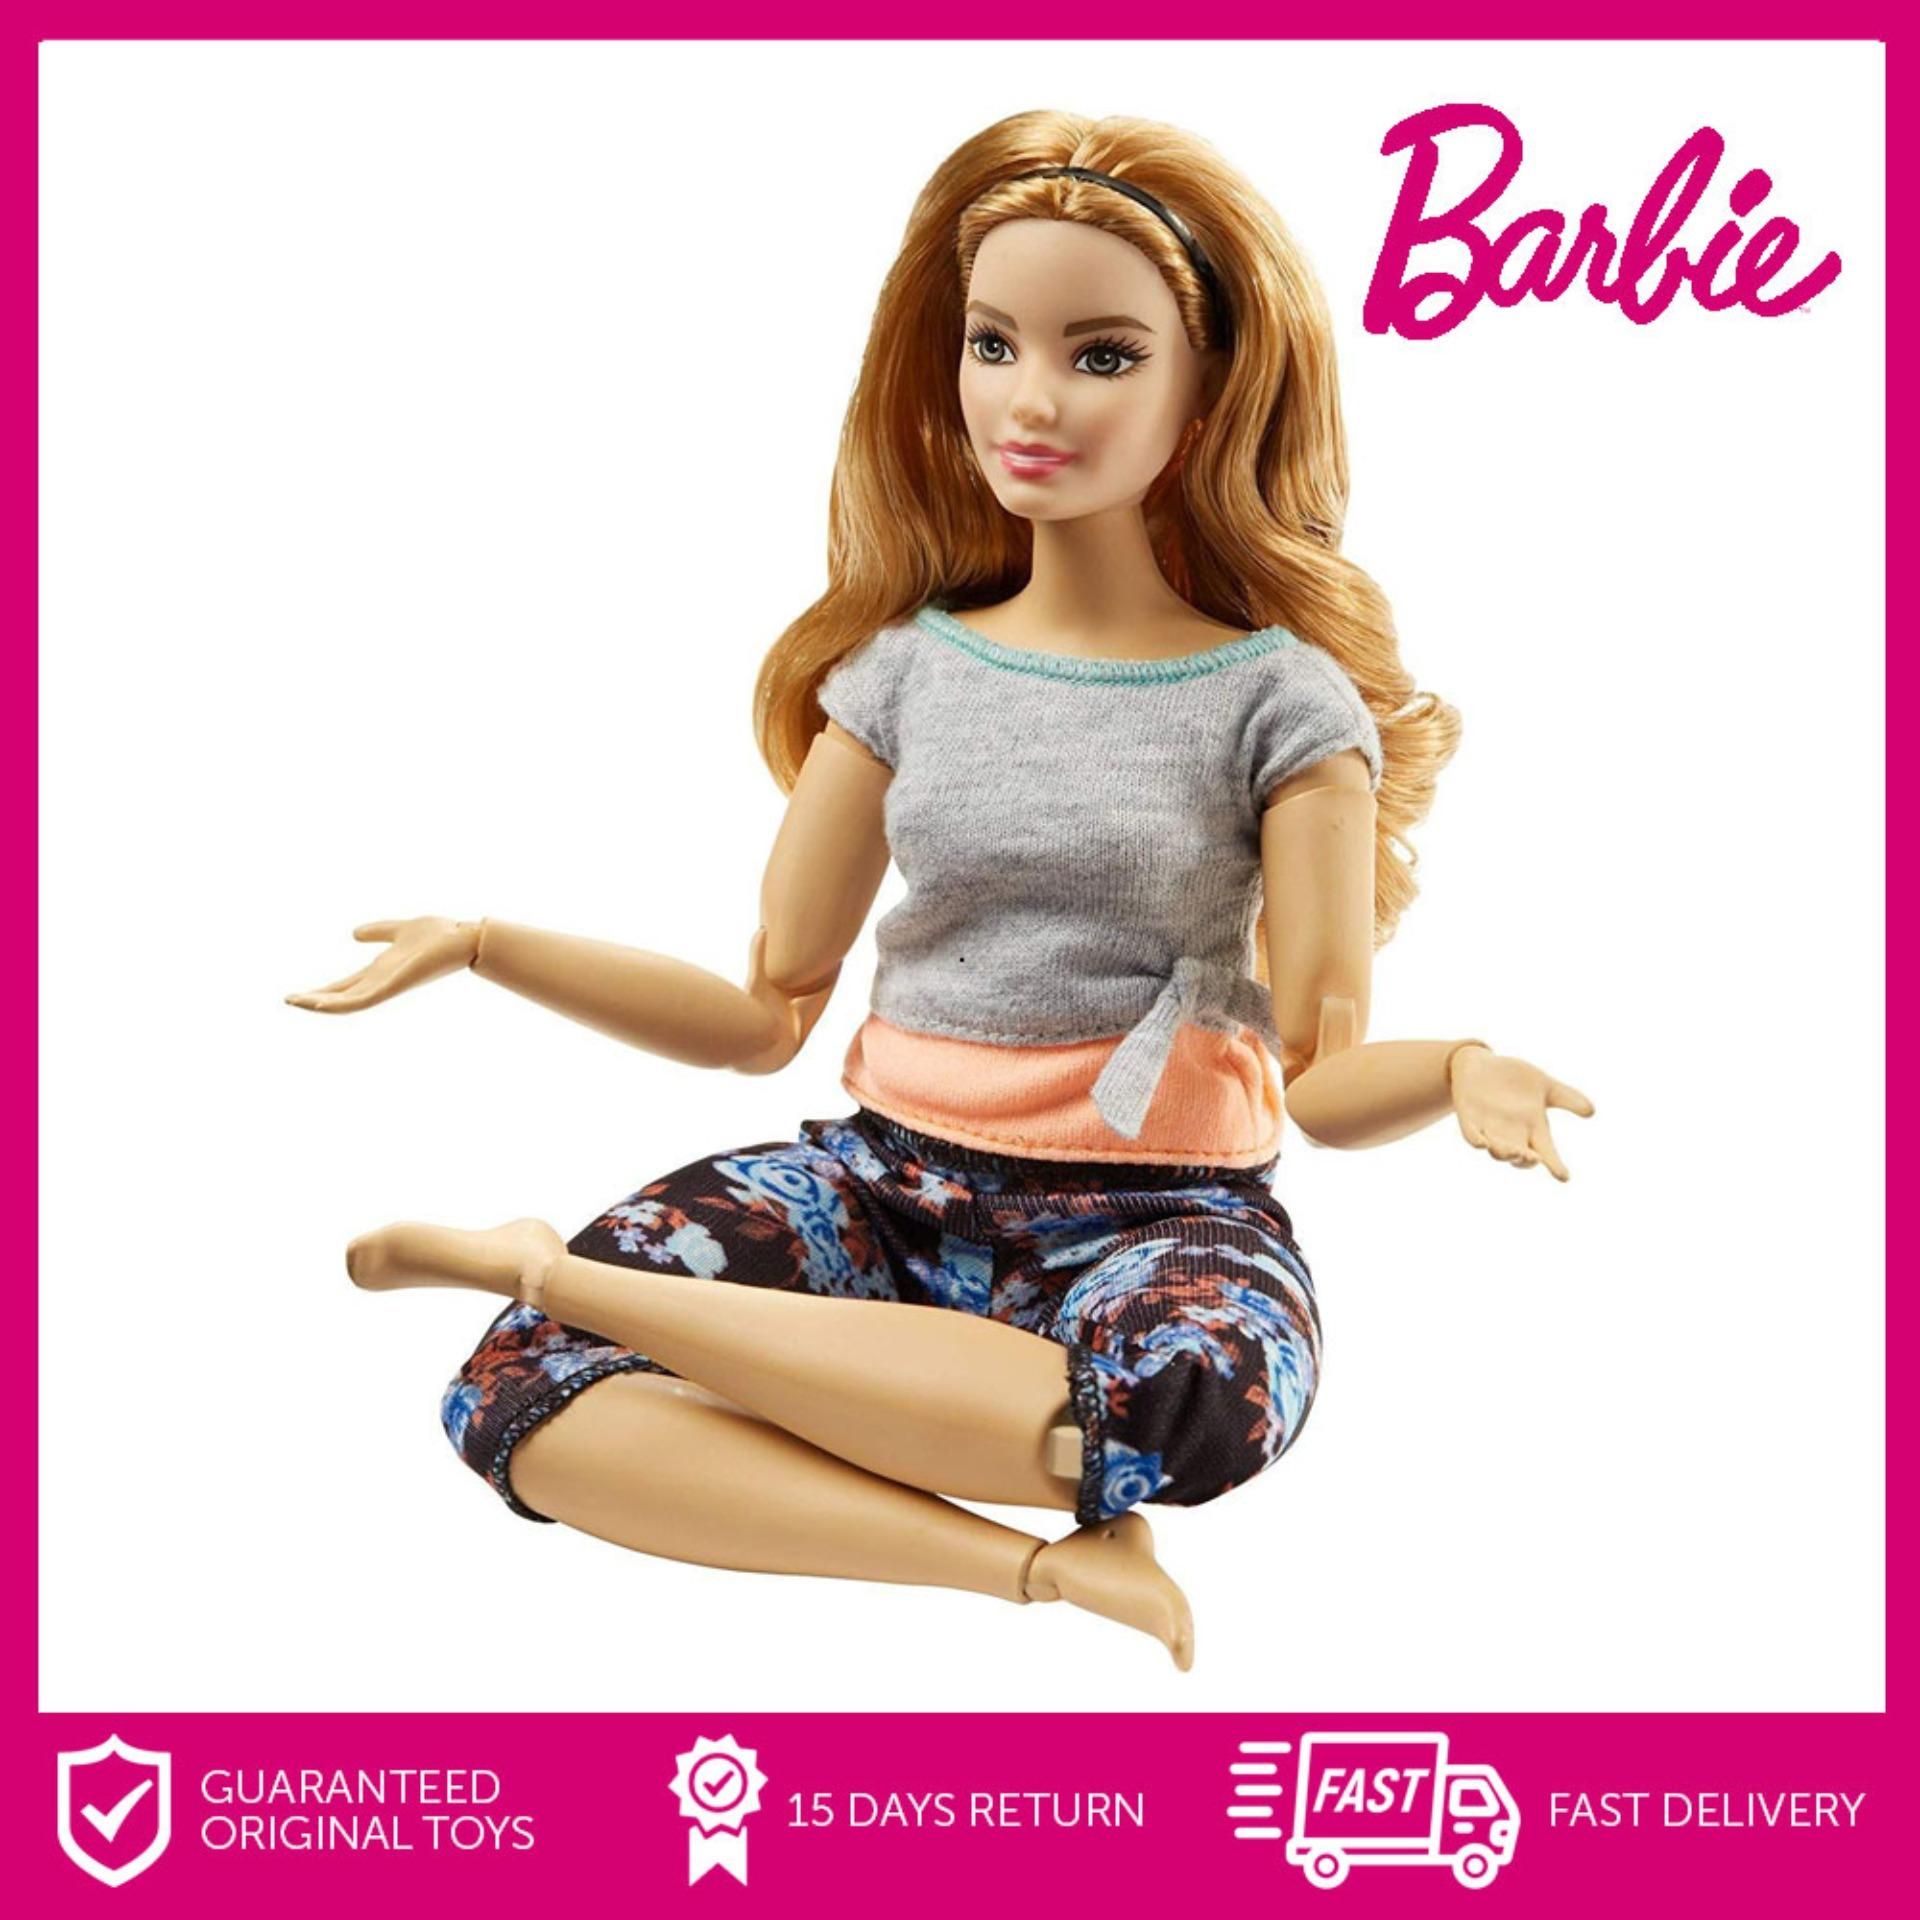 Buy Barbie Top Products Online at Best Price